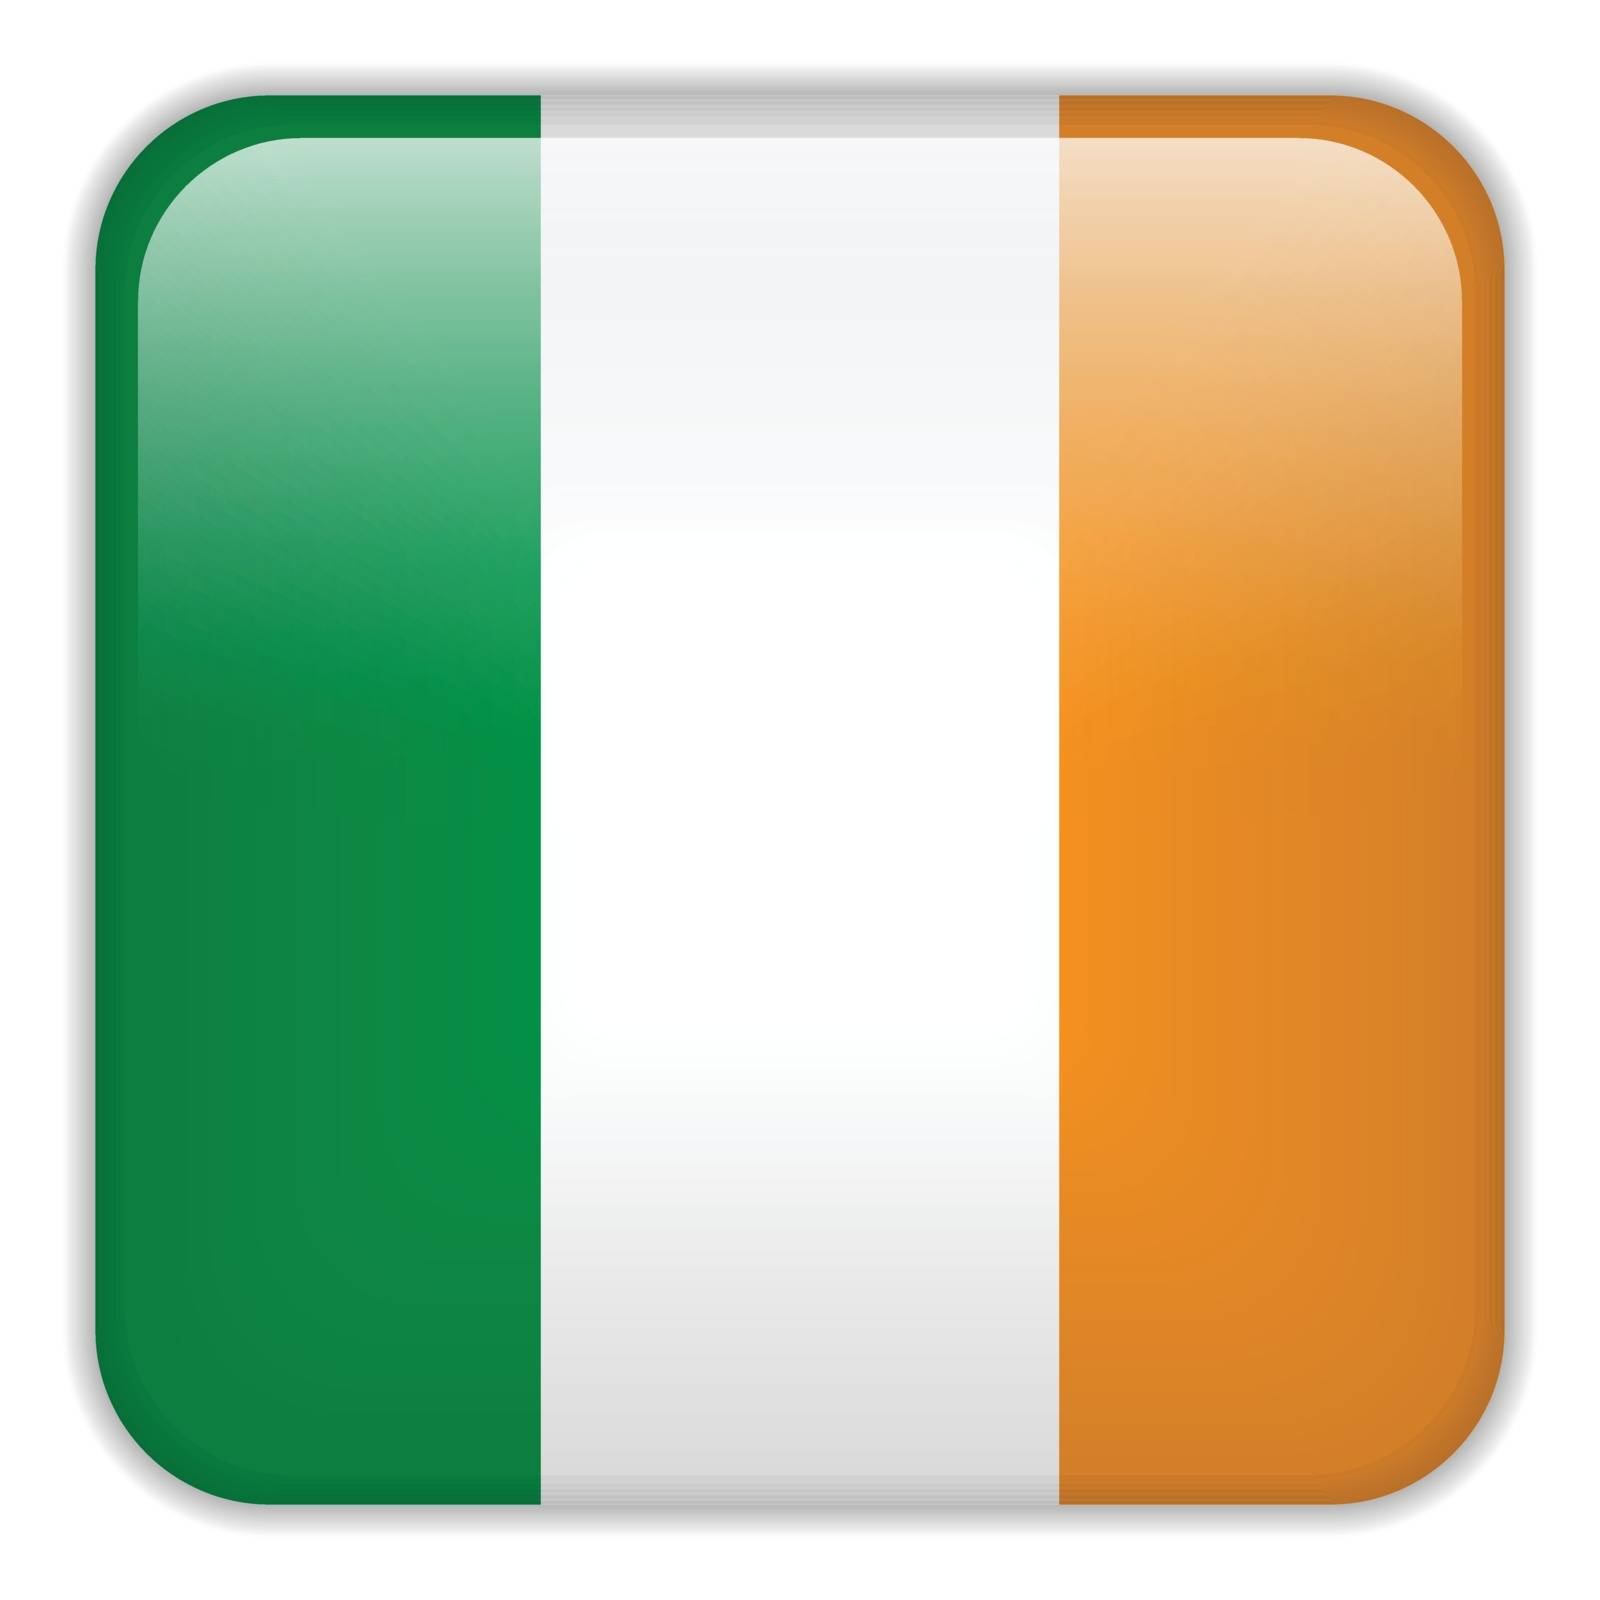 Vector - Ireland Flag Smartphone Application Square Buttons